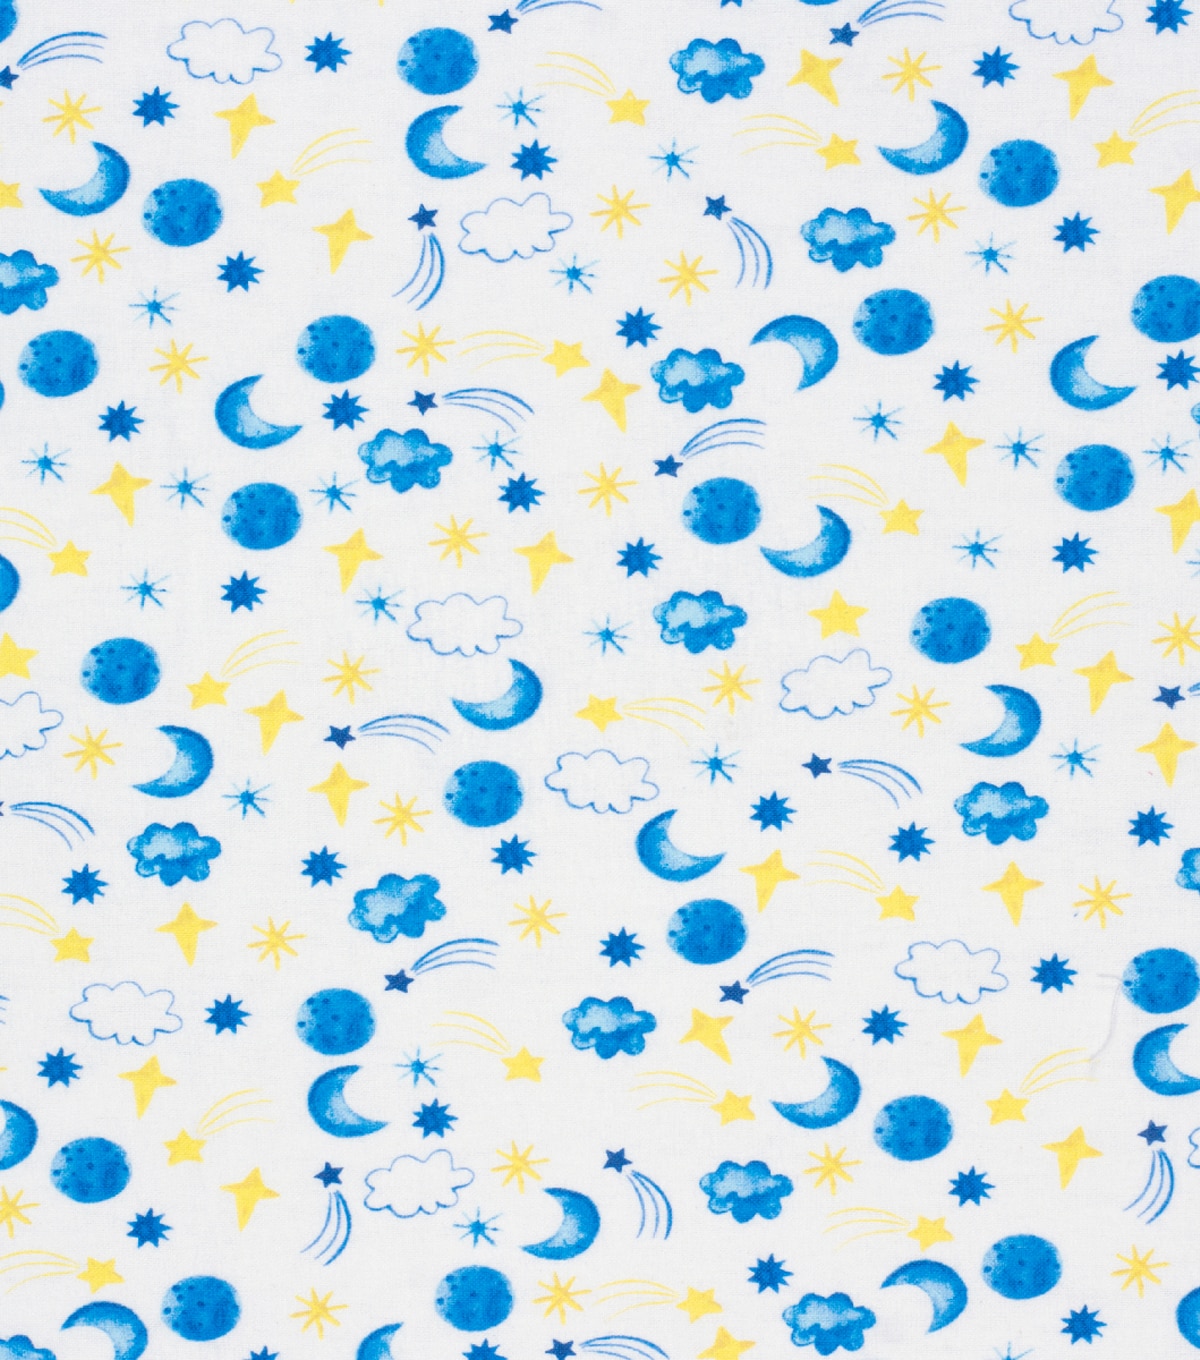 Nursery Flannel Fabric Stars And Planets In The Night Sky | JOANN